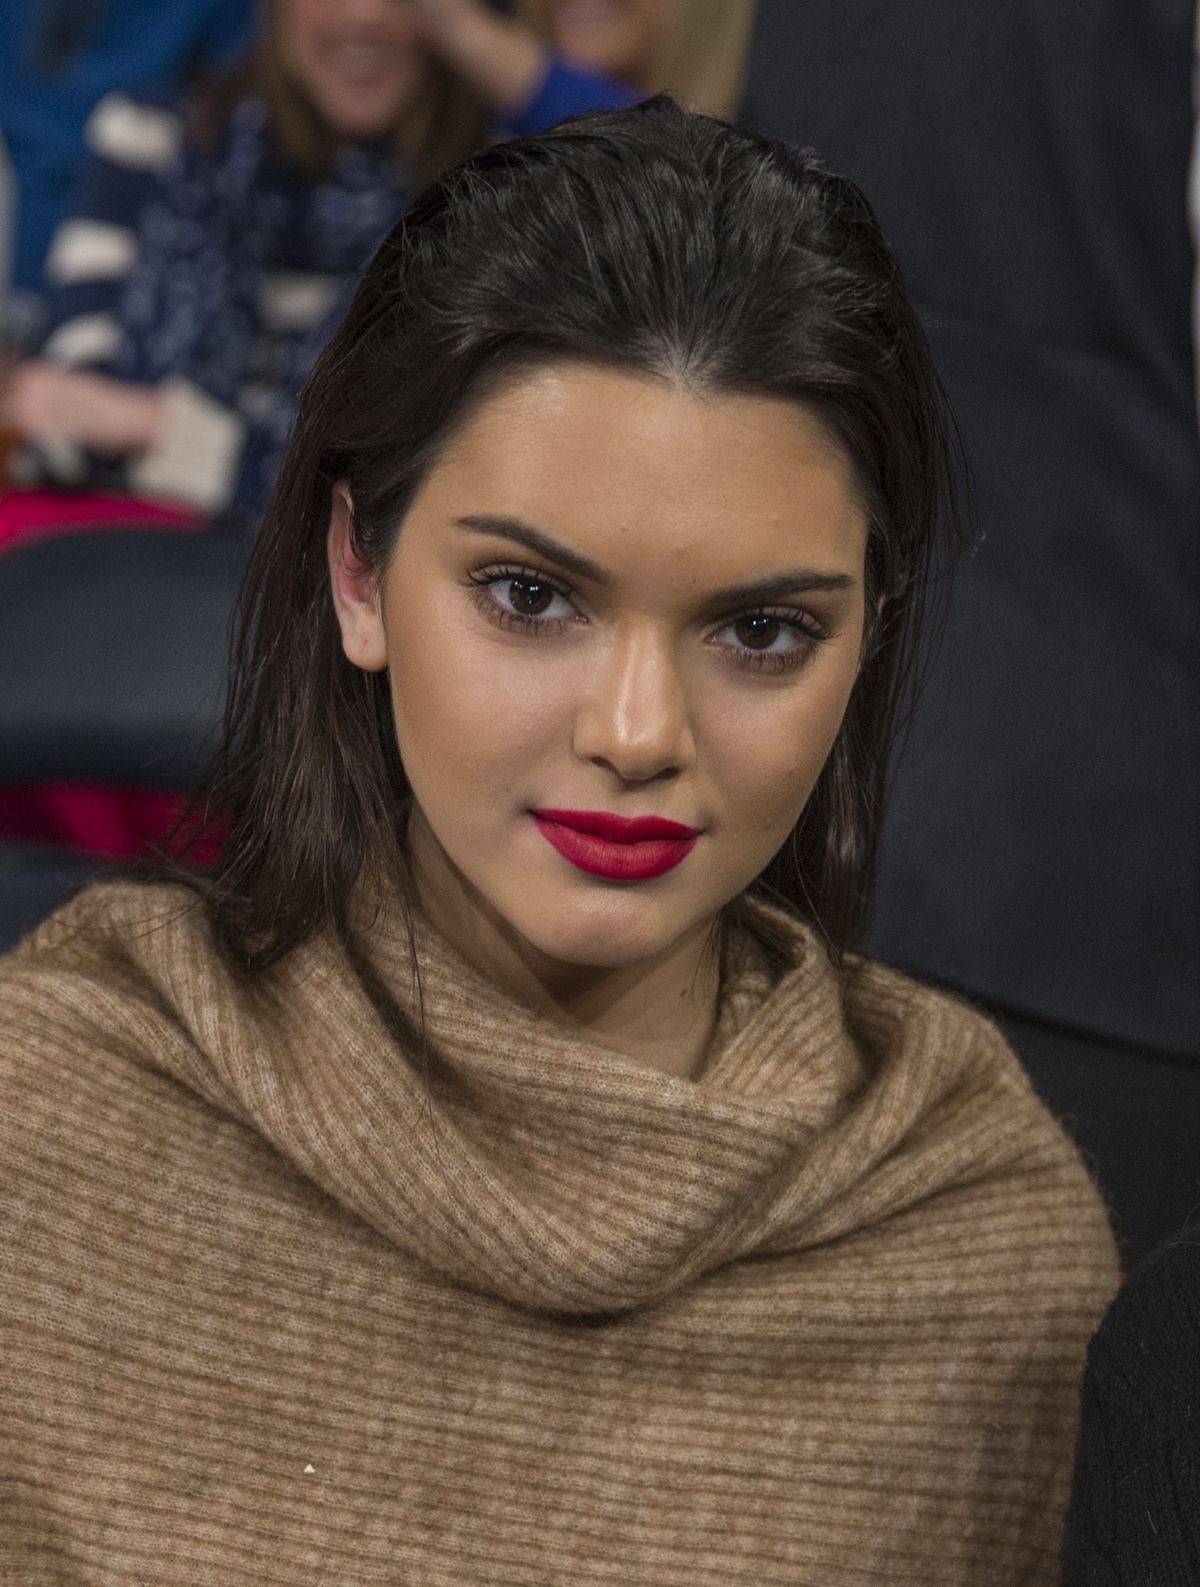 KENDALL JENNER at Knicks vs Wizards Game in New York – HawtCelebs